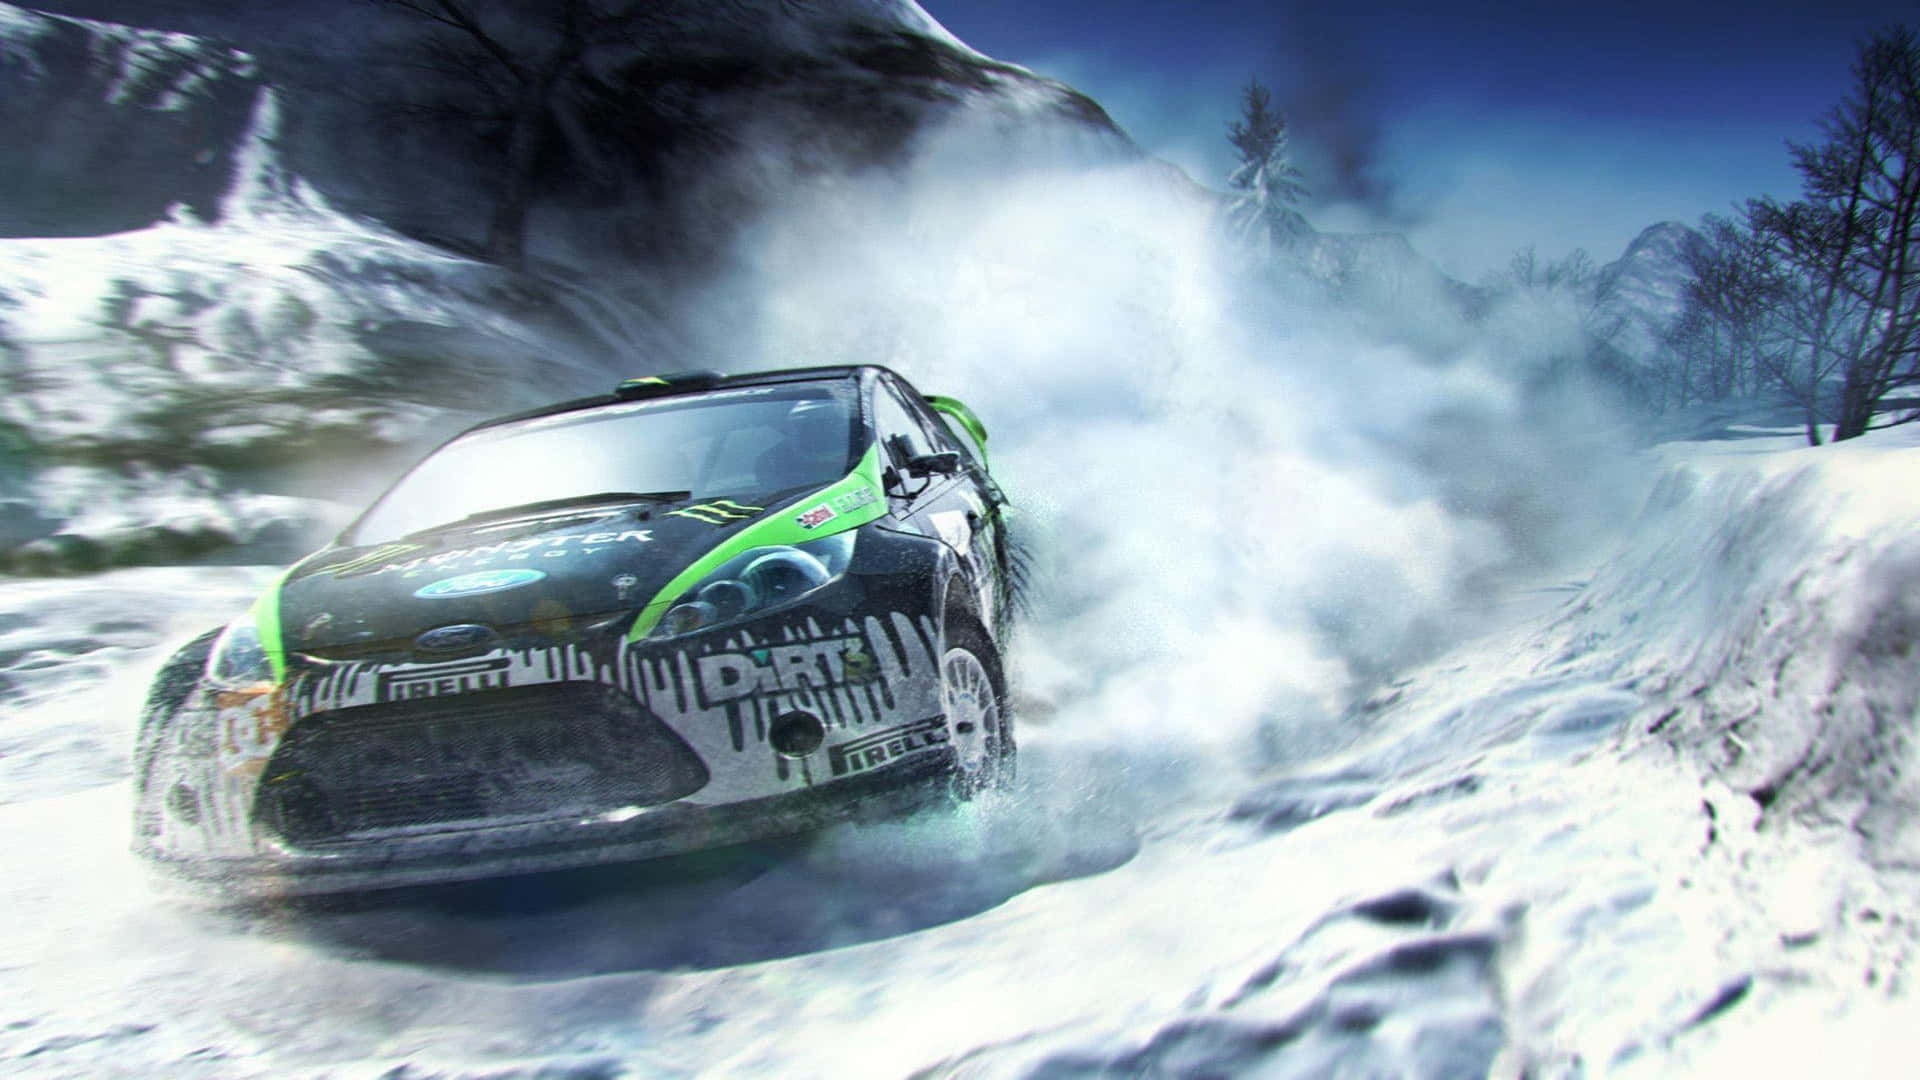 Take the wheel and experience off-road racing thrills with Dirt 3!